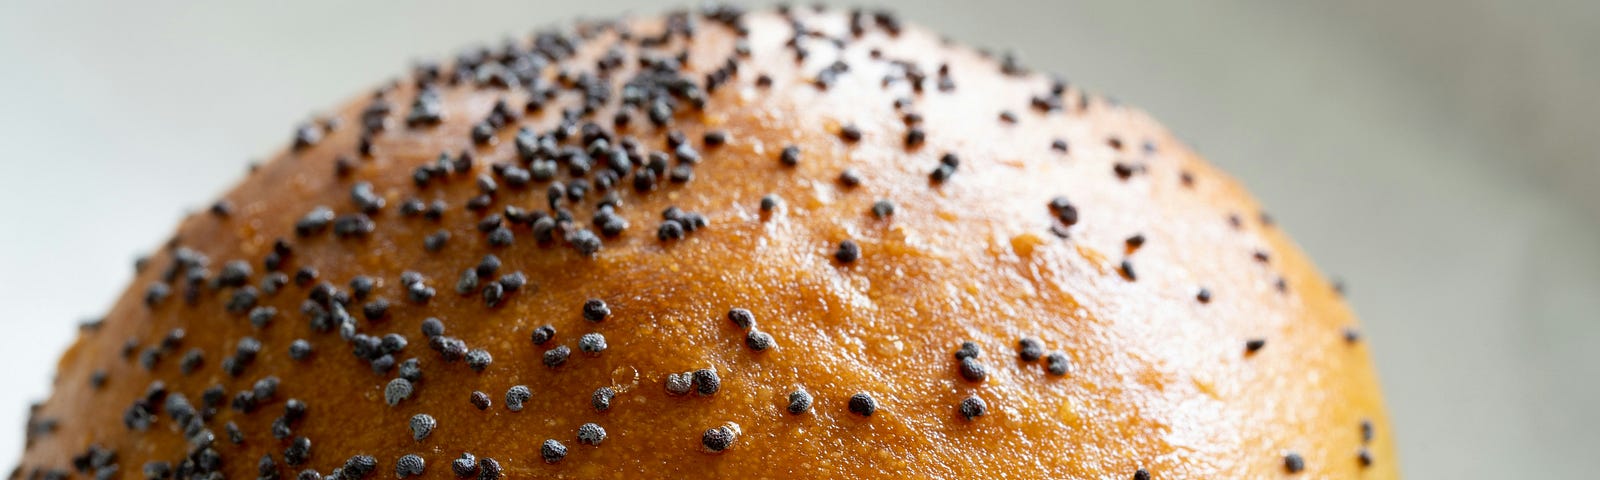 I perfectly golden browned rounded loaf of bread with poppy seeds glazed on top. I looks inviting for the first warm bite of bread .